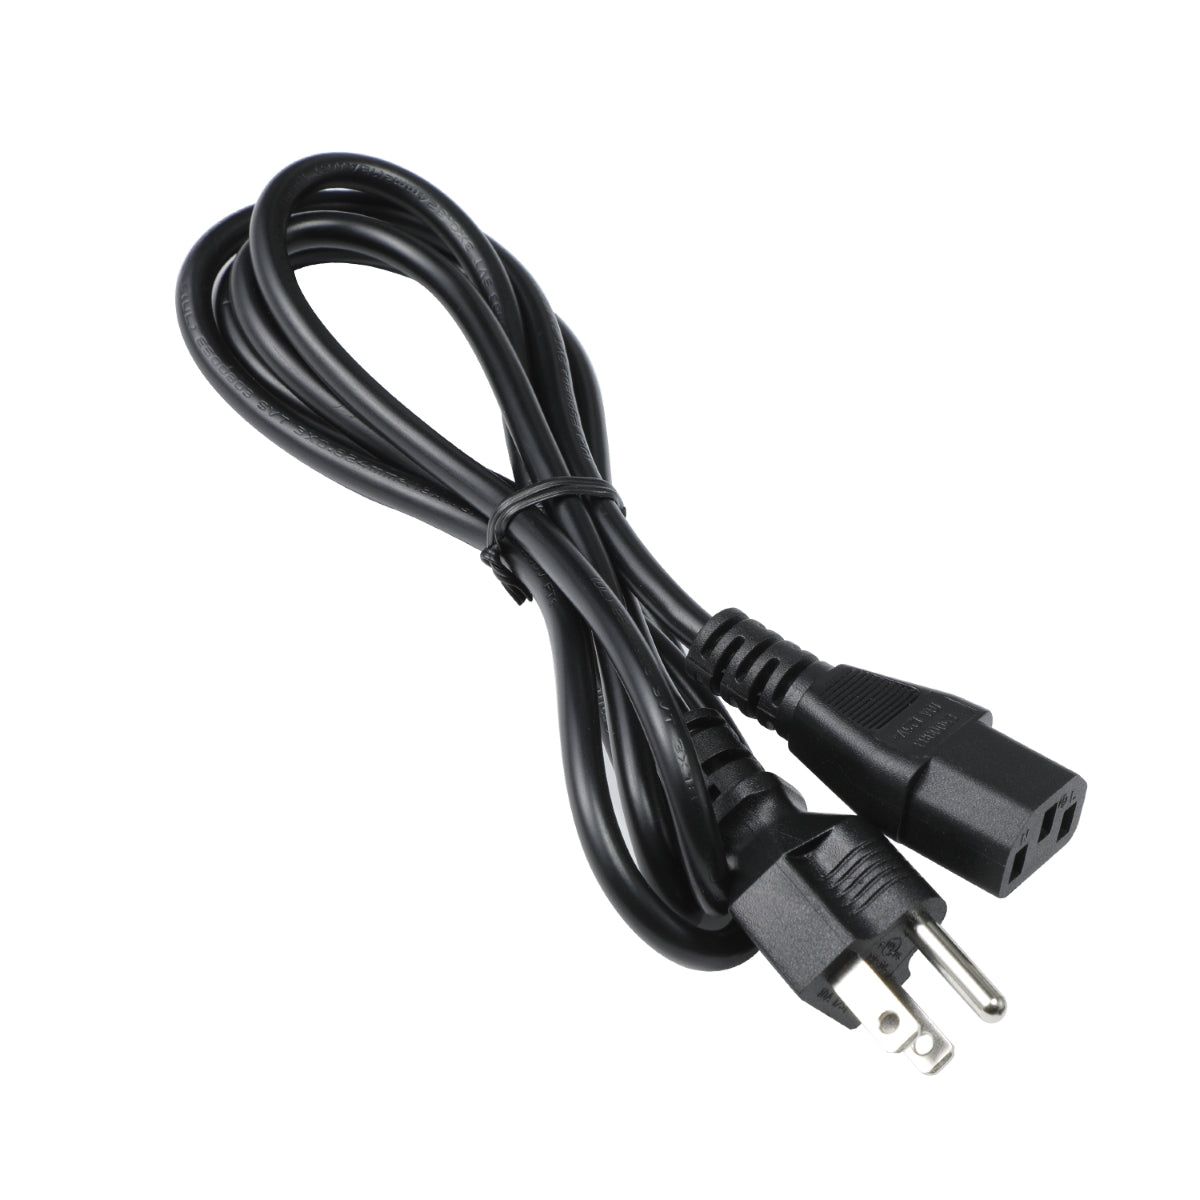 Power Cord for Dell P2217H Monitor.